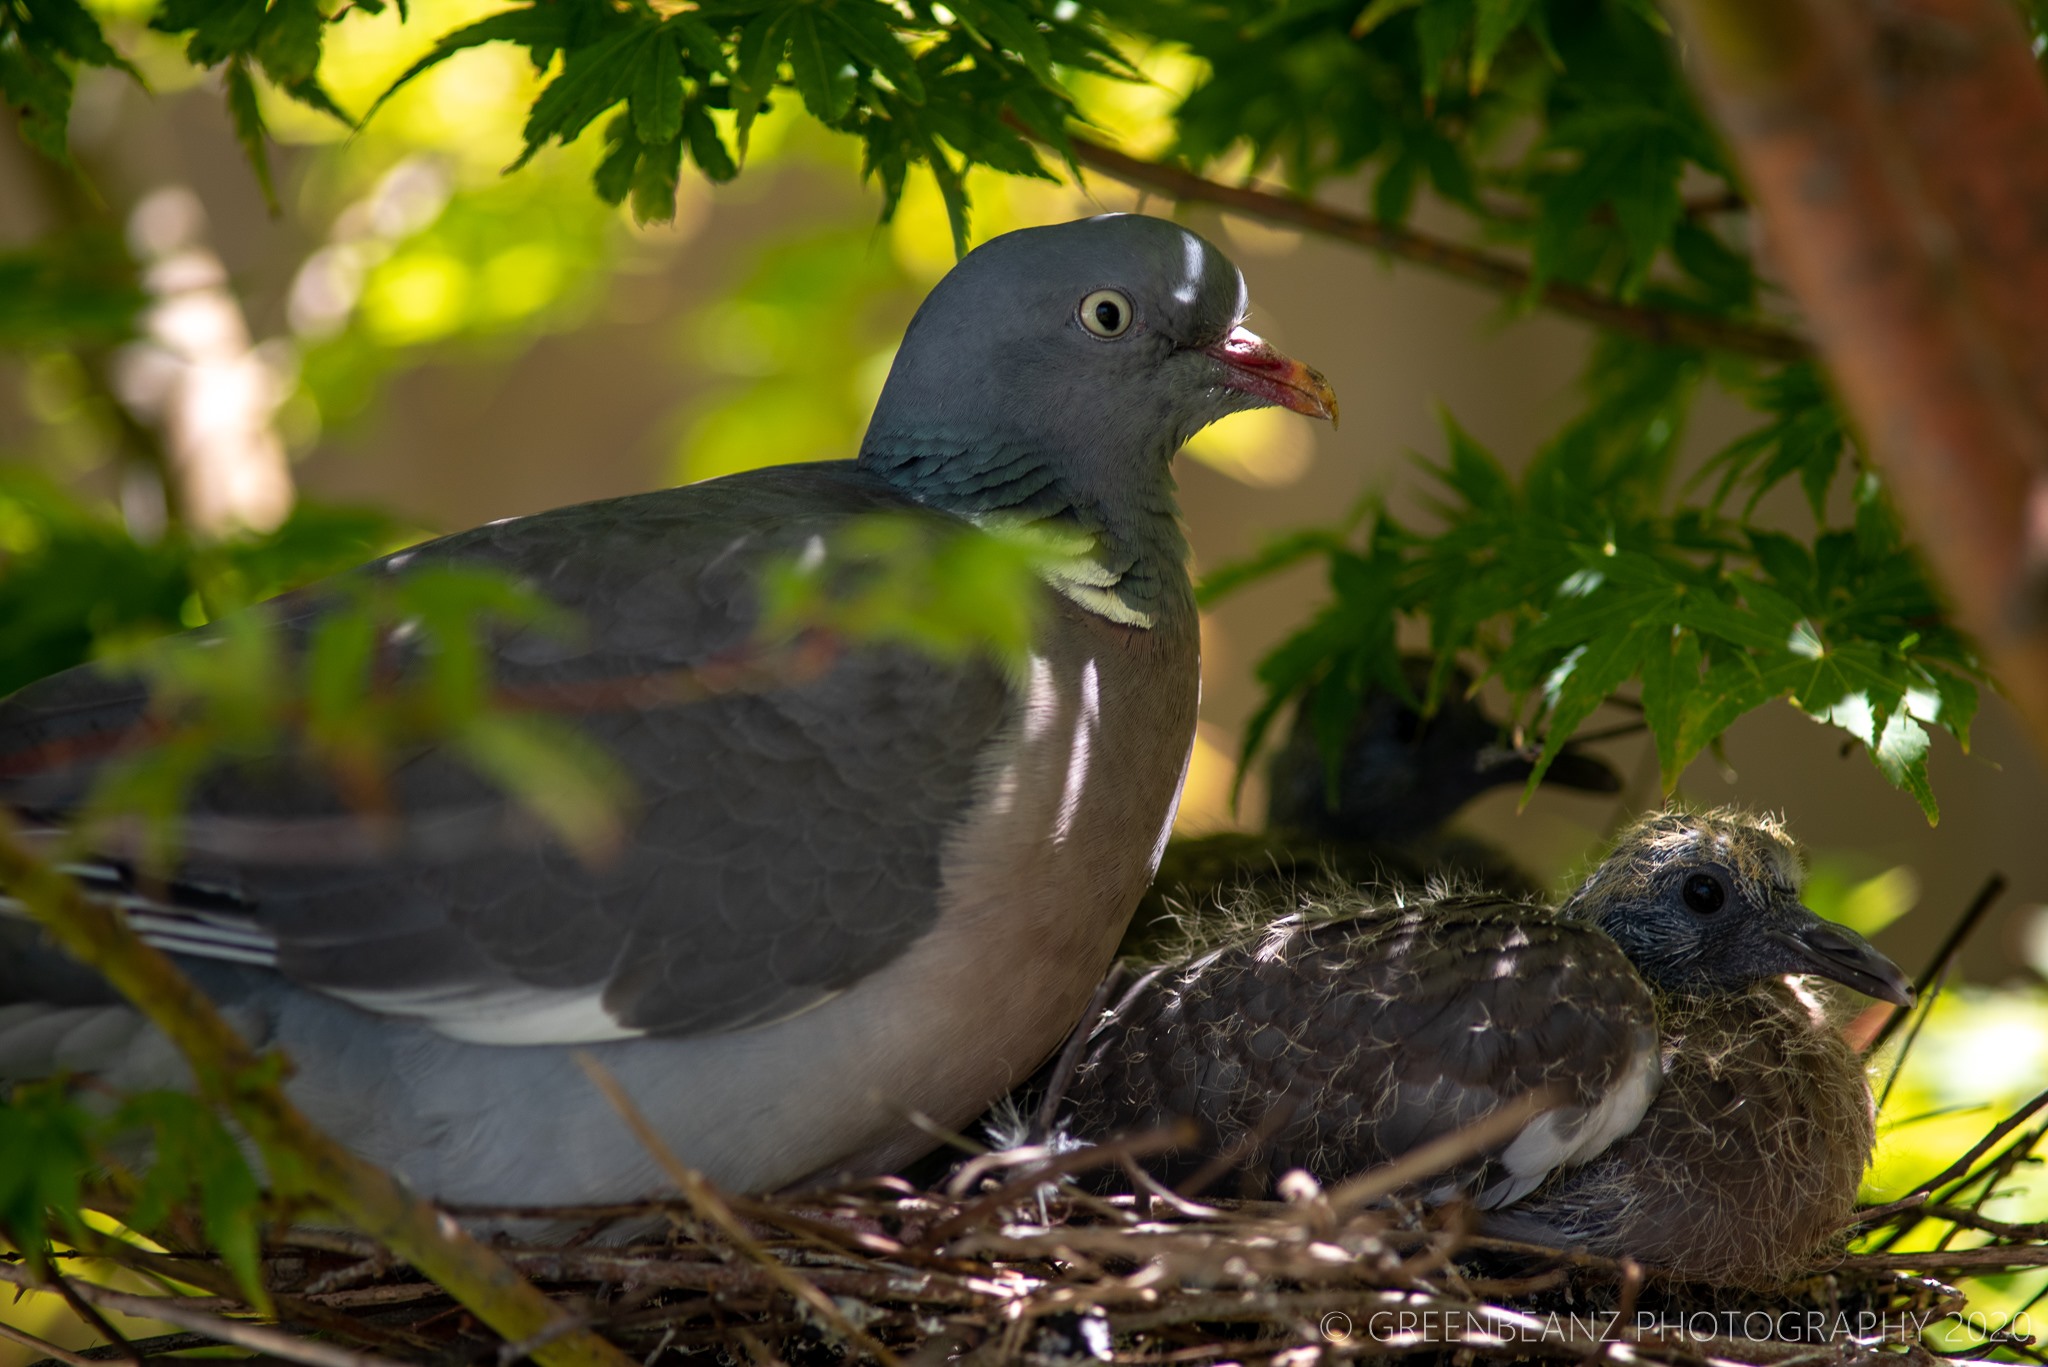 Pigeon with chick in nest May 2020